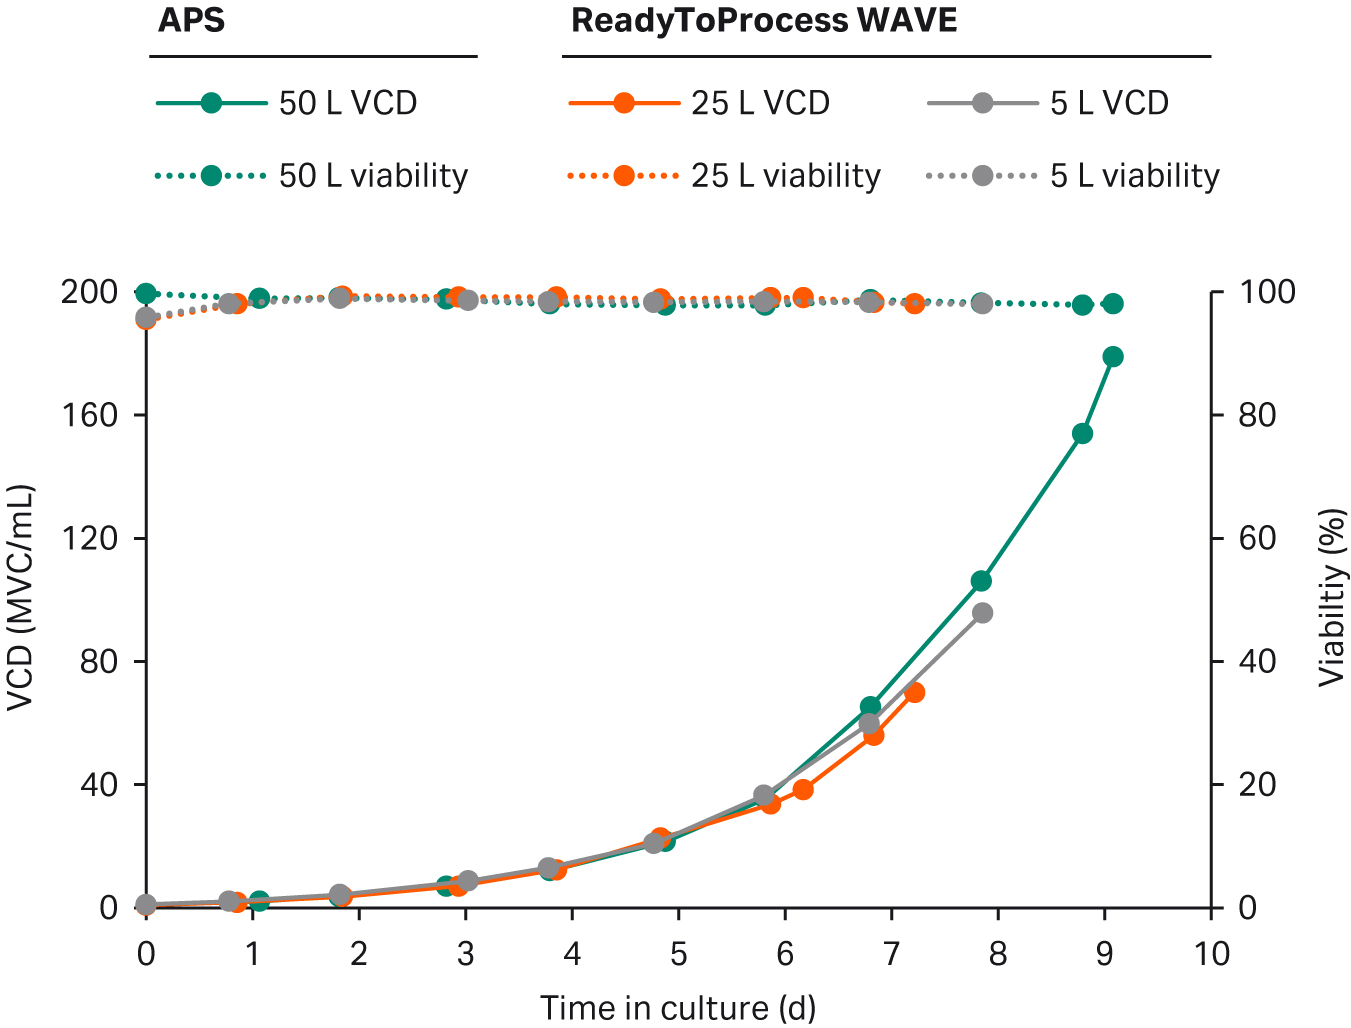 Growth and viability for intensified N-1 perfusion processes - ReadyToProcess WAVE and Xcellerex APS